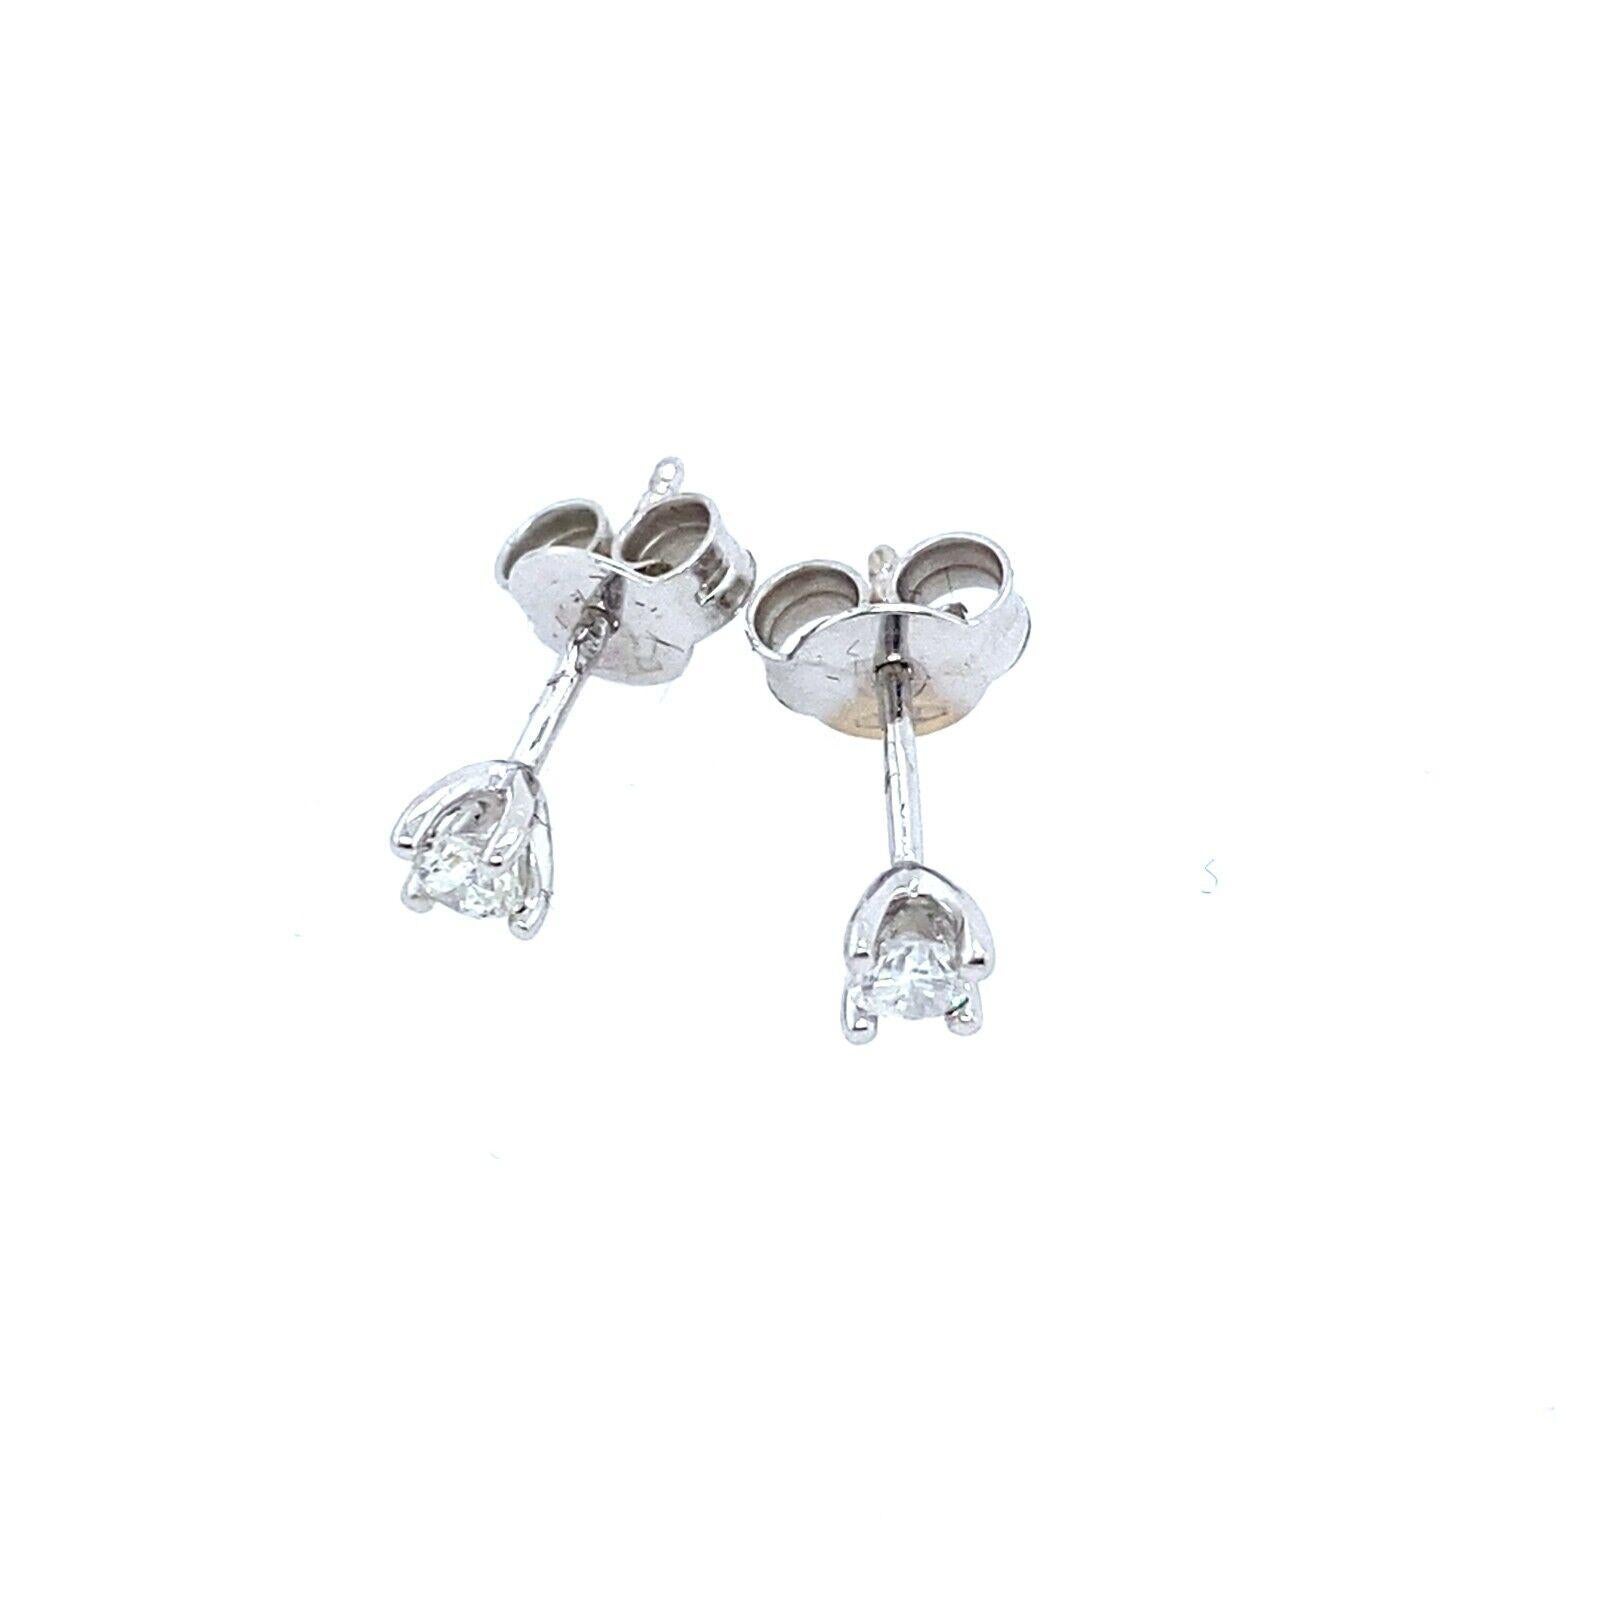 These stunning Diamond earrings  are the perfect pair to add to your collection.  They are crafted from 18ct White Gold.  The pair is set with sparkling diamonds,  with a total Diamond weight of 0.35ct.

Additional Information: 
Total Diamond